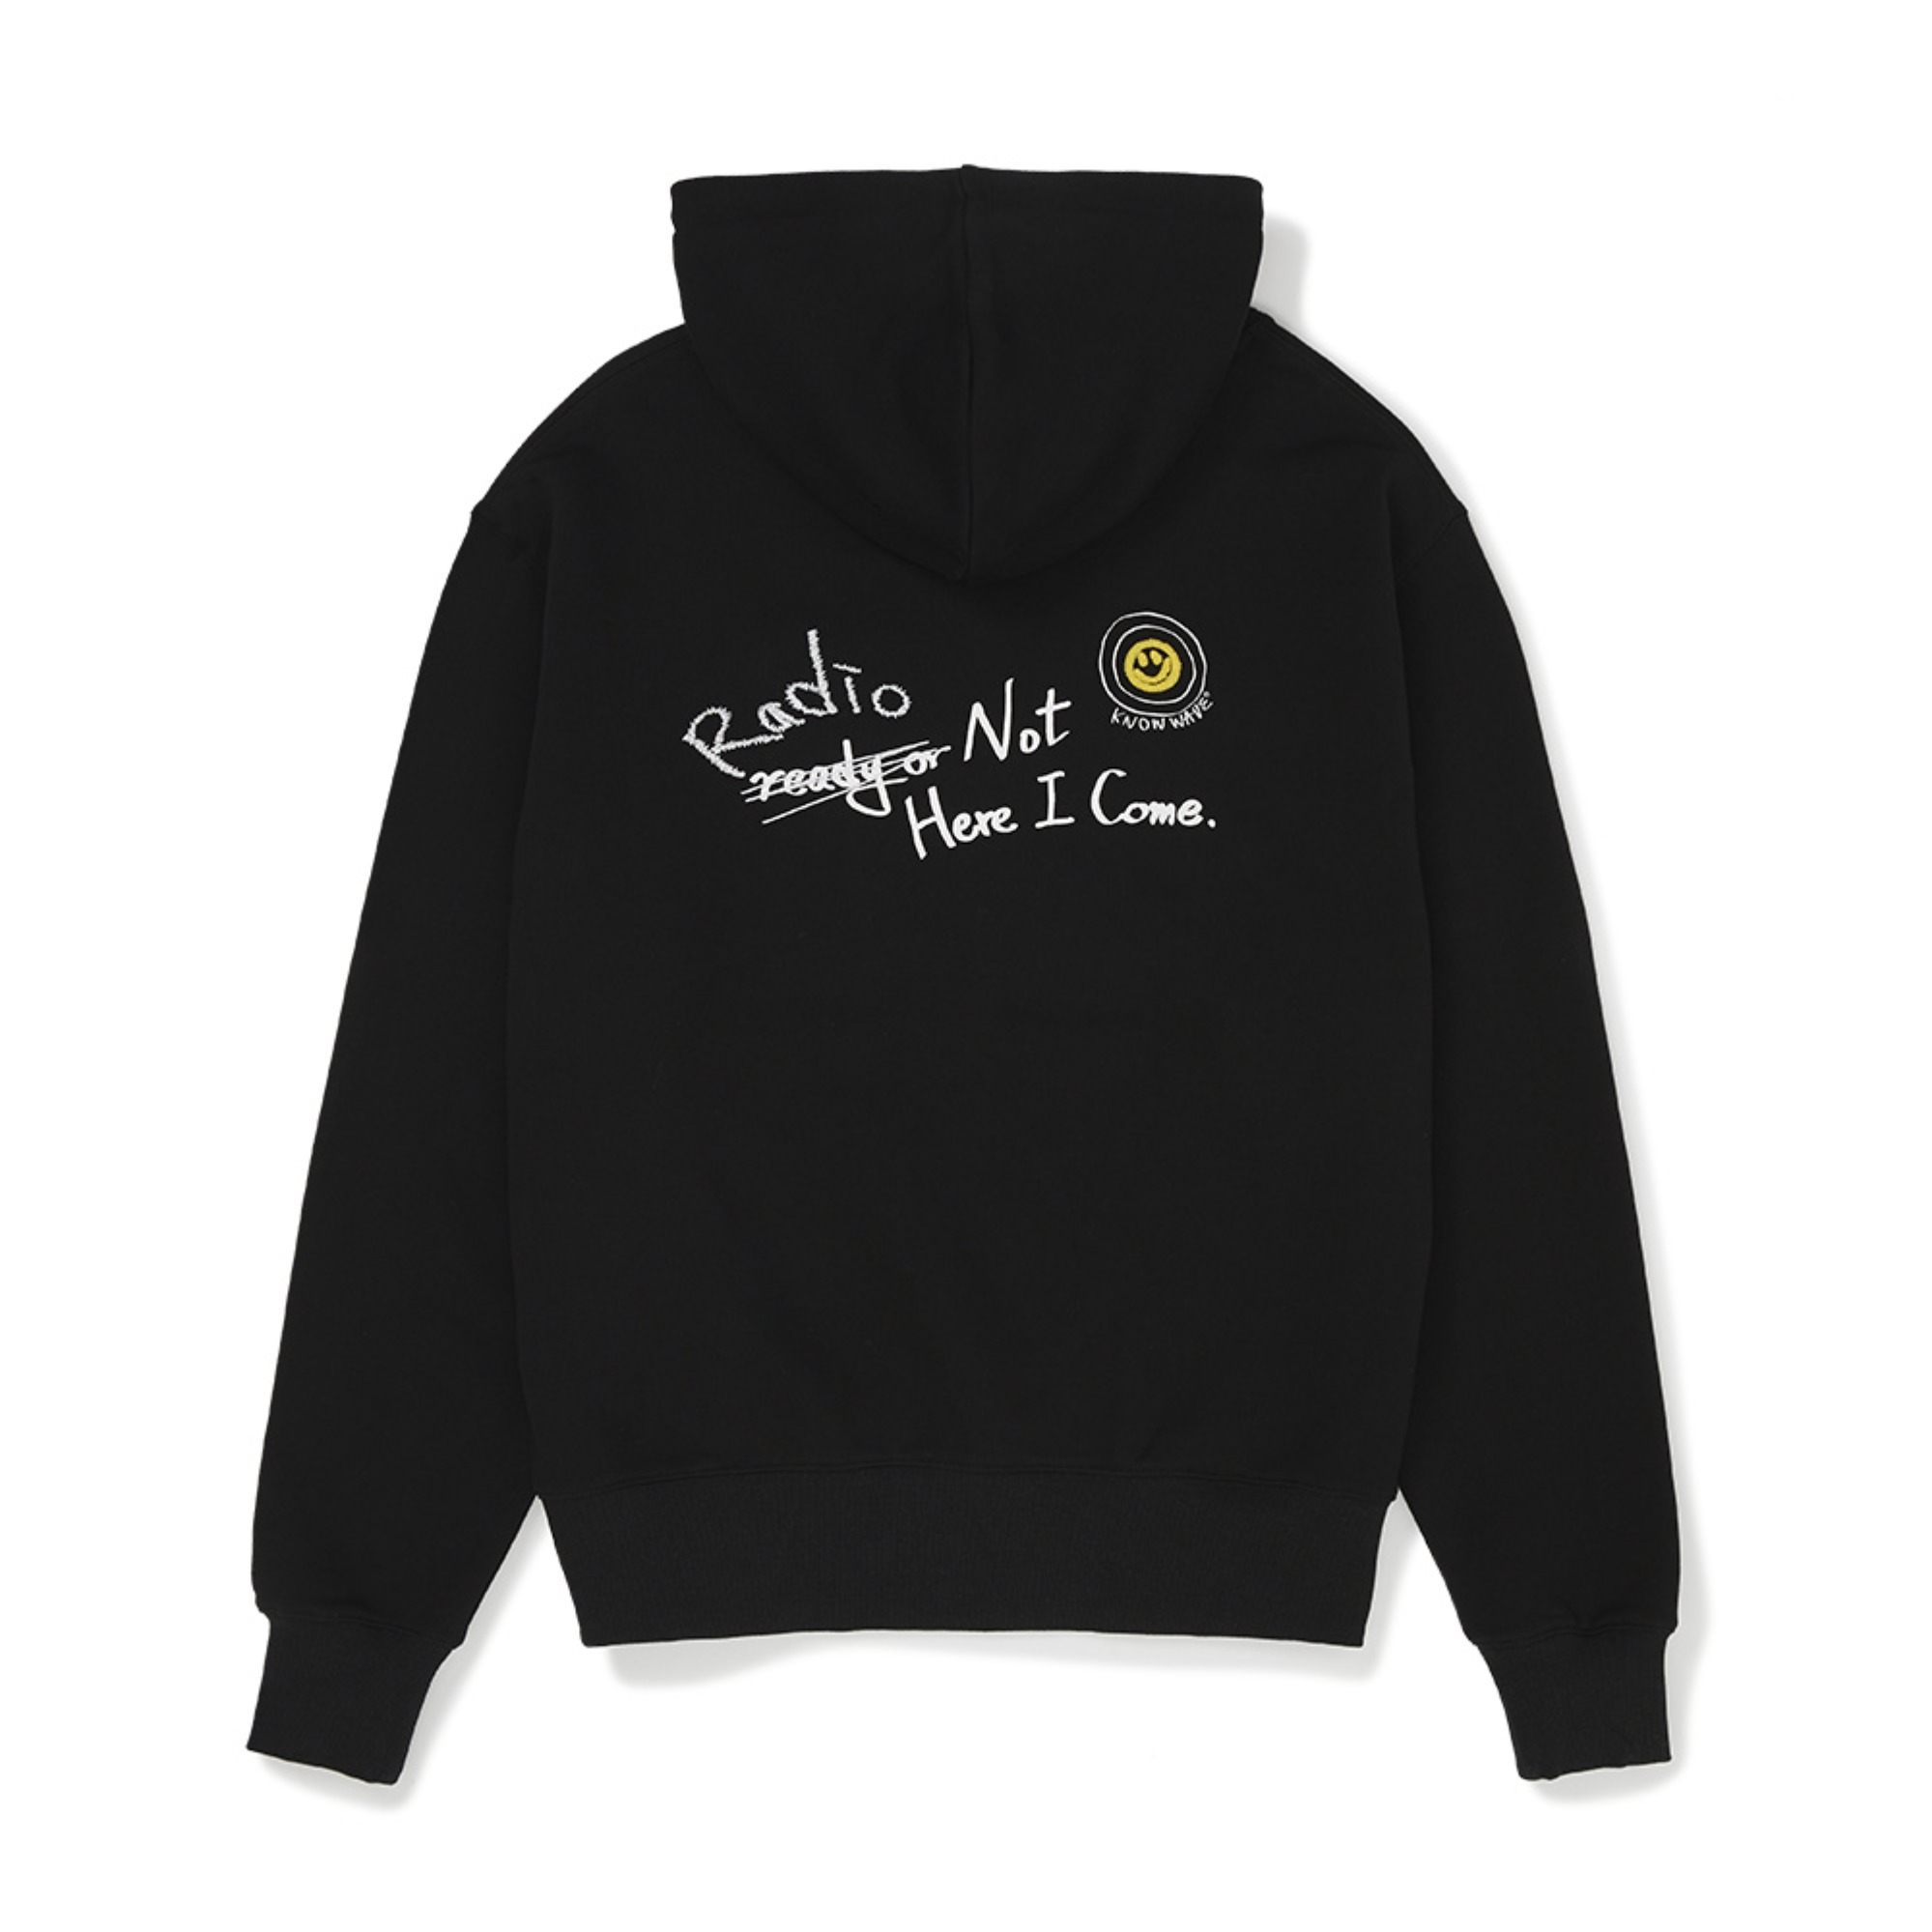 READY OR NOT SMILE EMBRODIERY HOODIE KNT028m(BLACK)